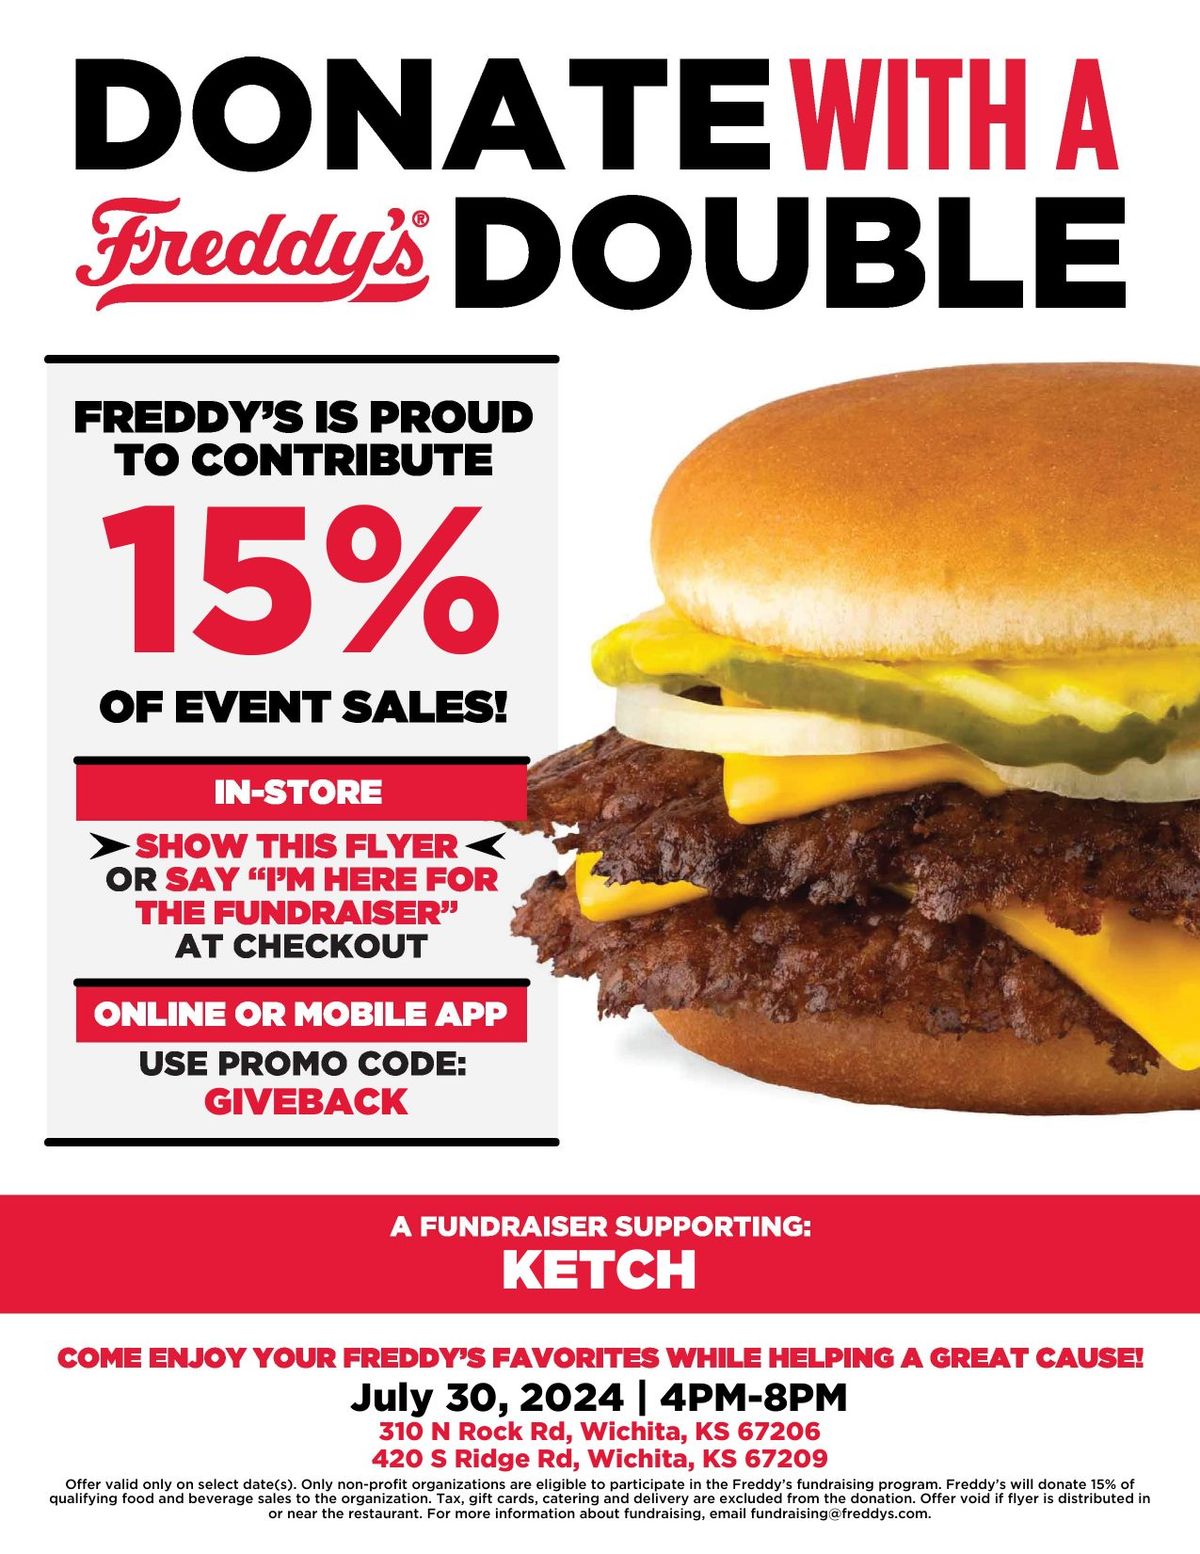 Freddy's Fundraiser for KETCH - West